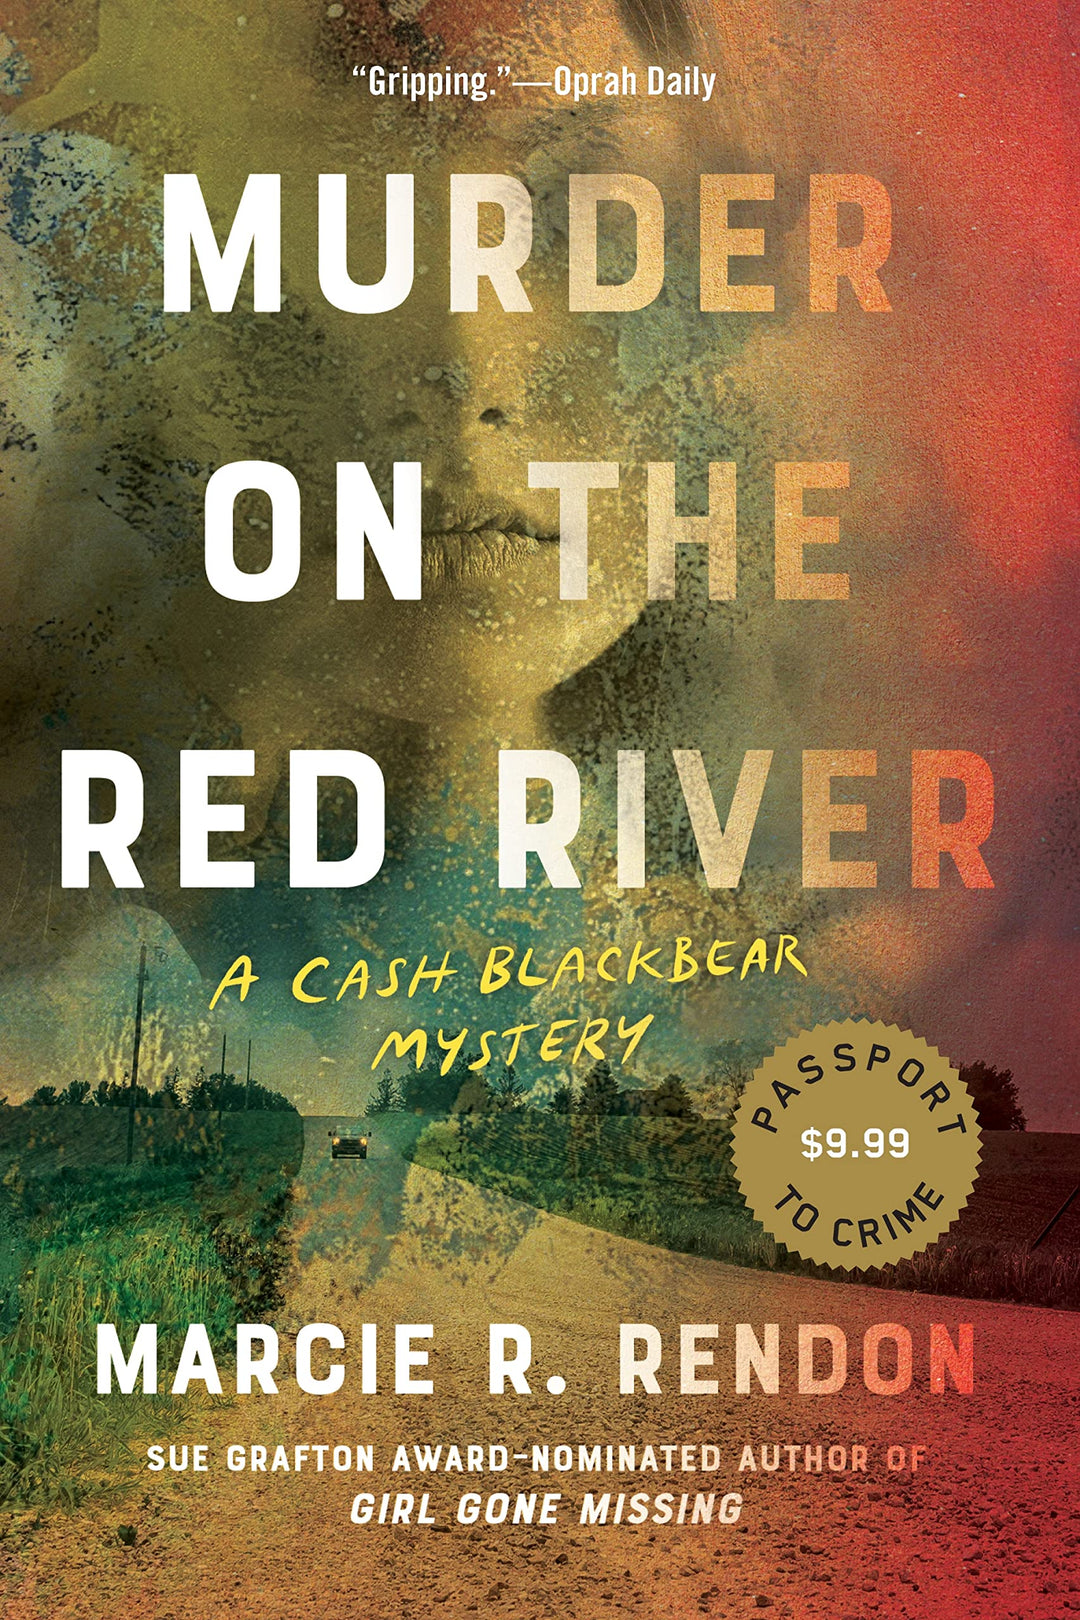 Murder on the Red River (A Cash Blackbear Mystery) by Marcie Rendon